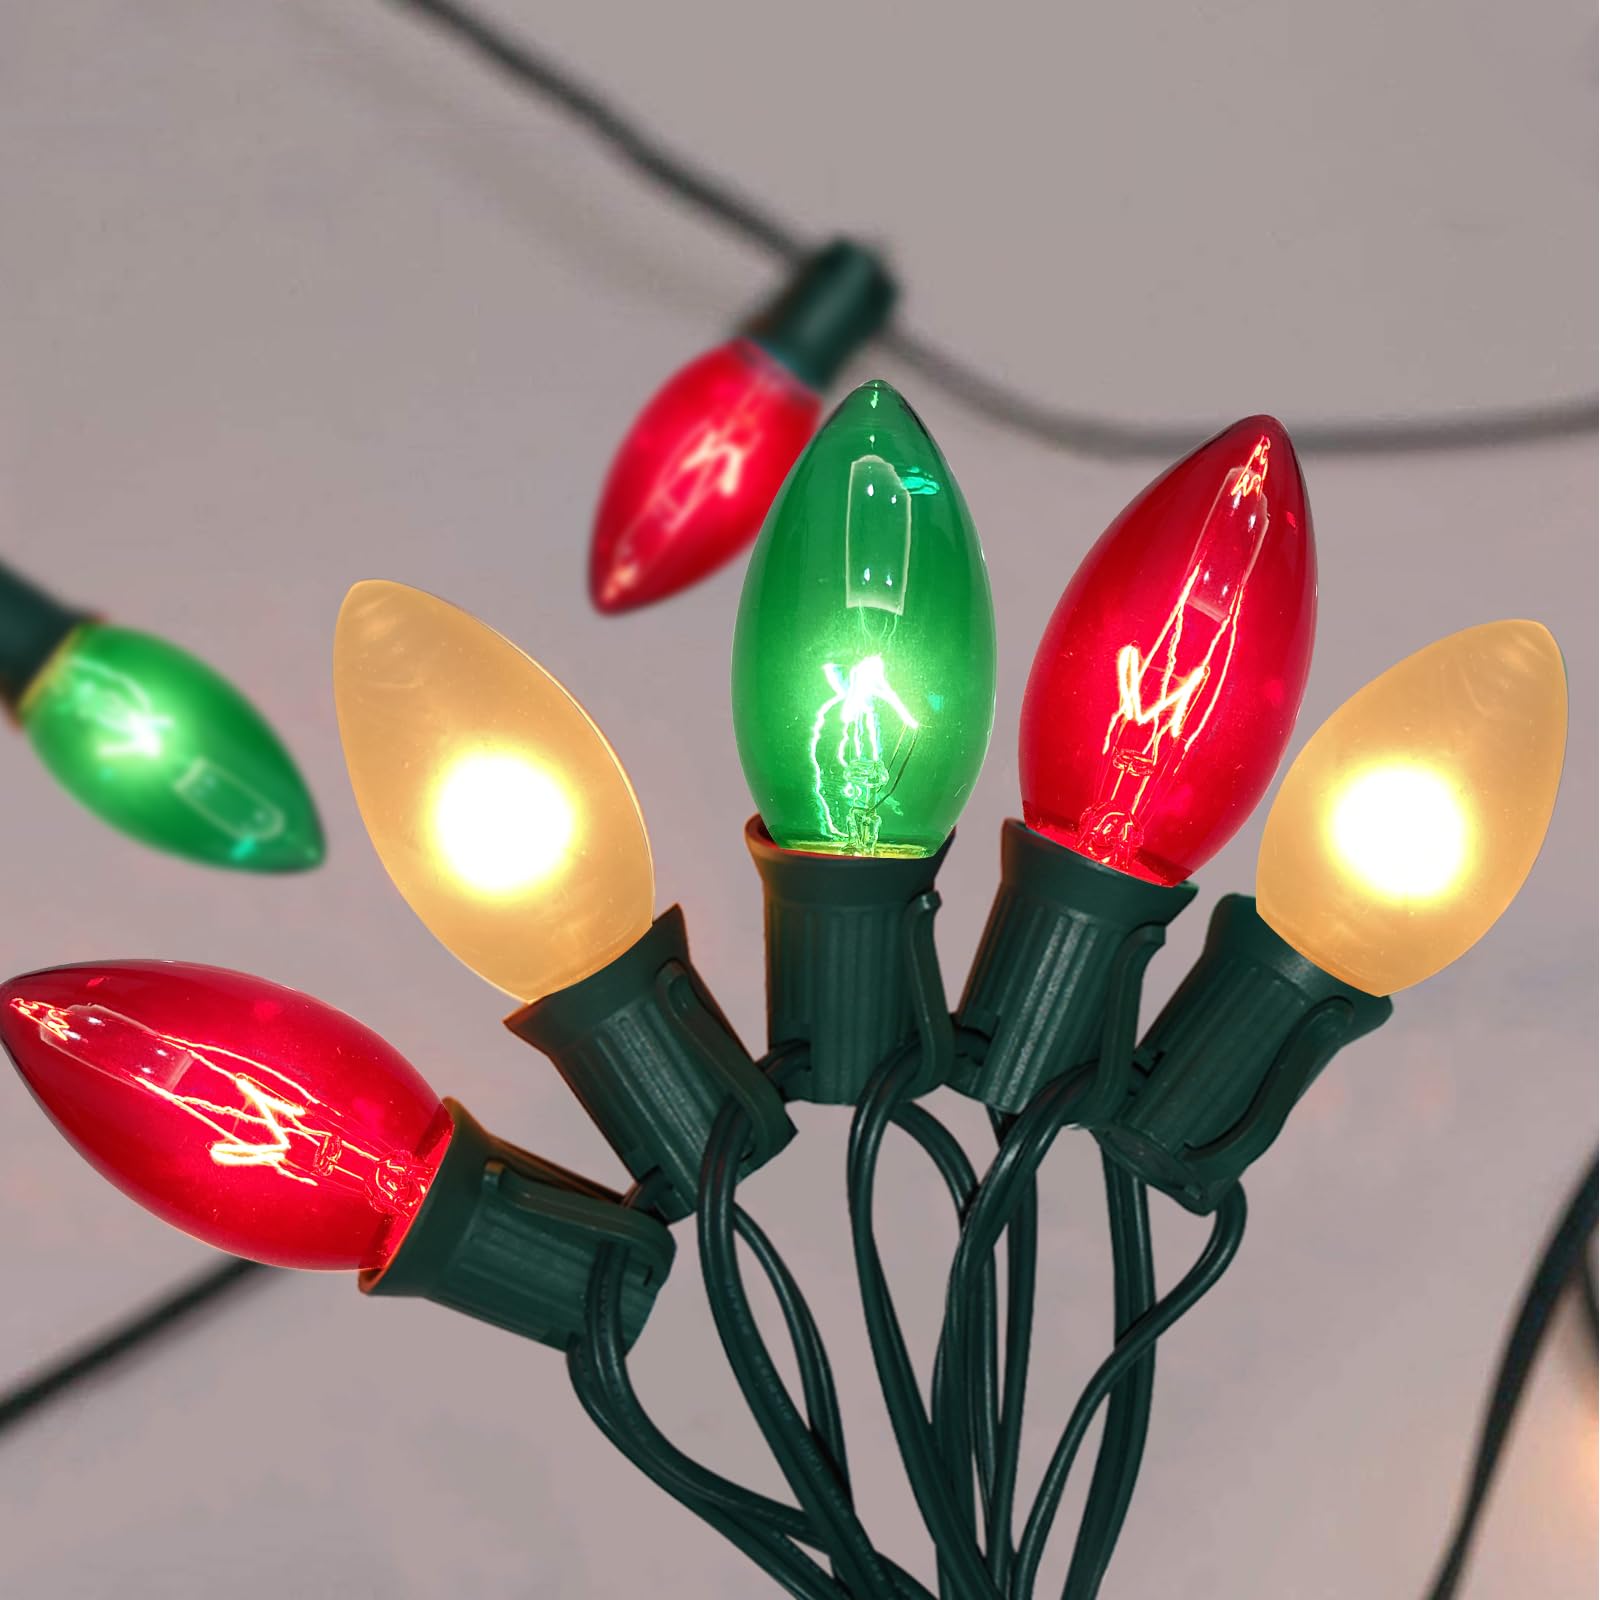 Goothy C9 Red White and Green Christmas Lights Outdoor 25FT Vintage Christmas Lights with 26 C9 Clear Colorful Bulbs UL Listed for Holi